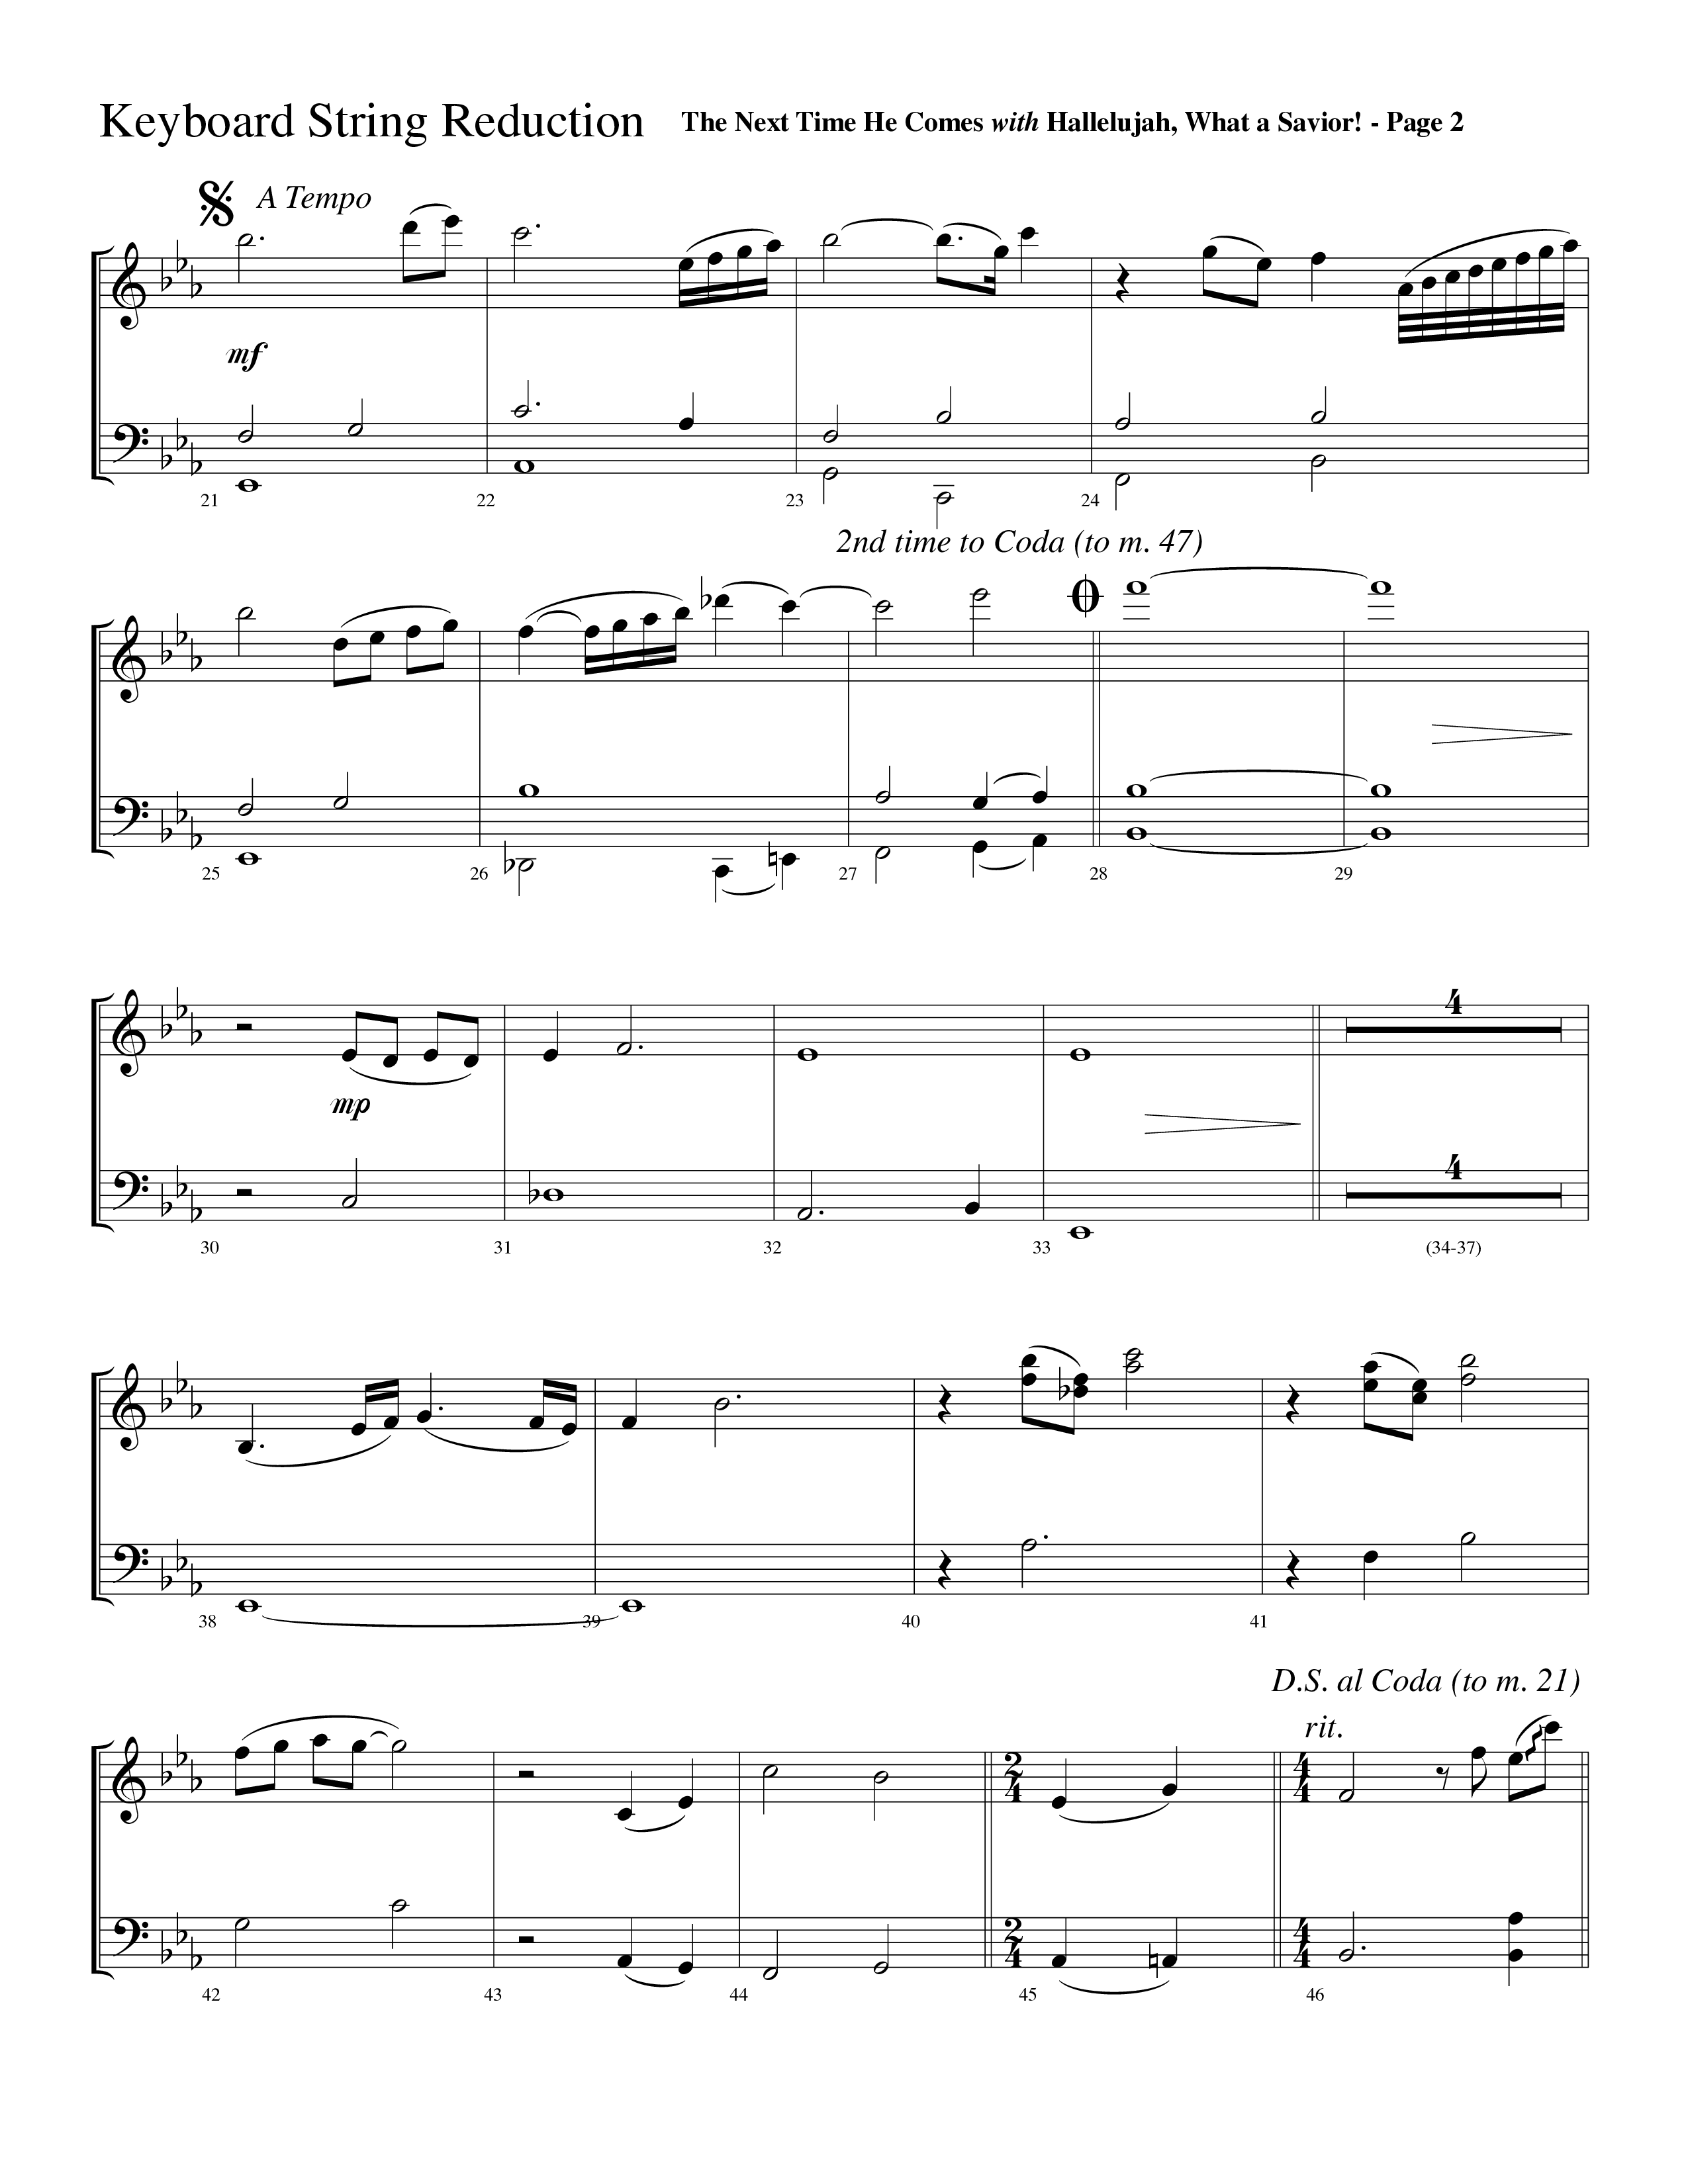 The Next Time He Comes (with Hallelujah What A Savior) (Choral Anthem SATB) String Reduction (Lifeway Choral / Arr. Dave Williamson)